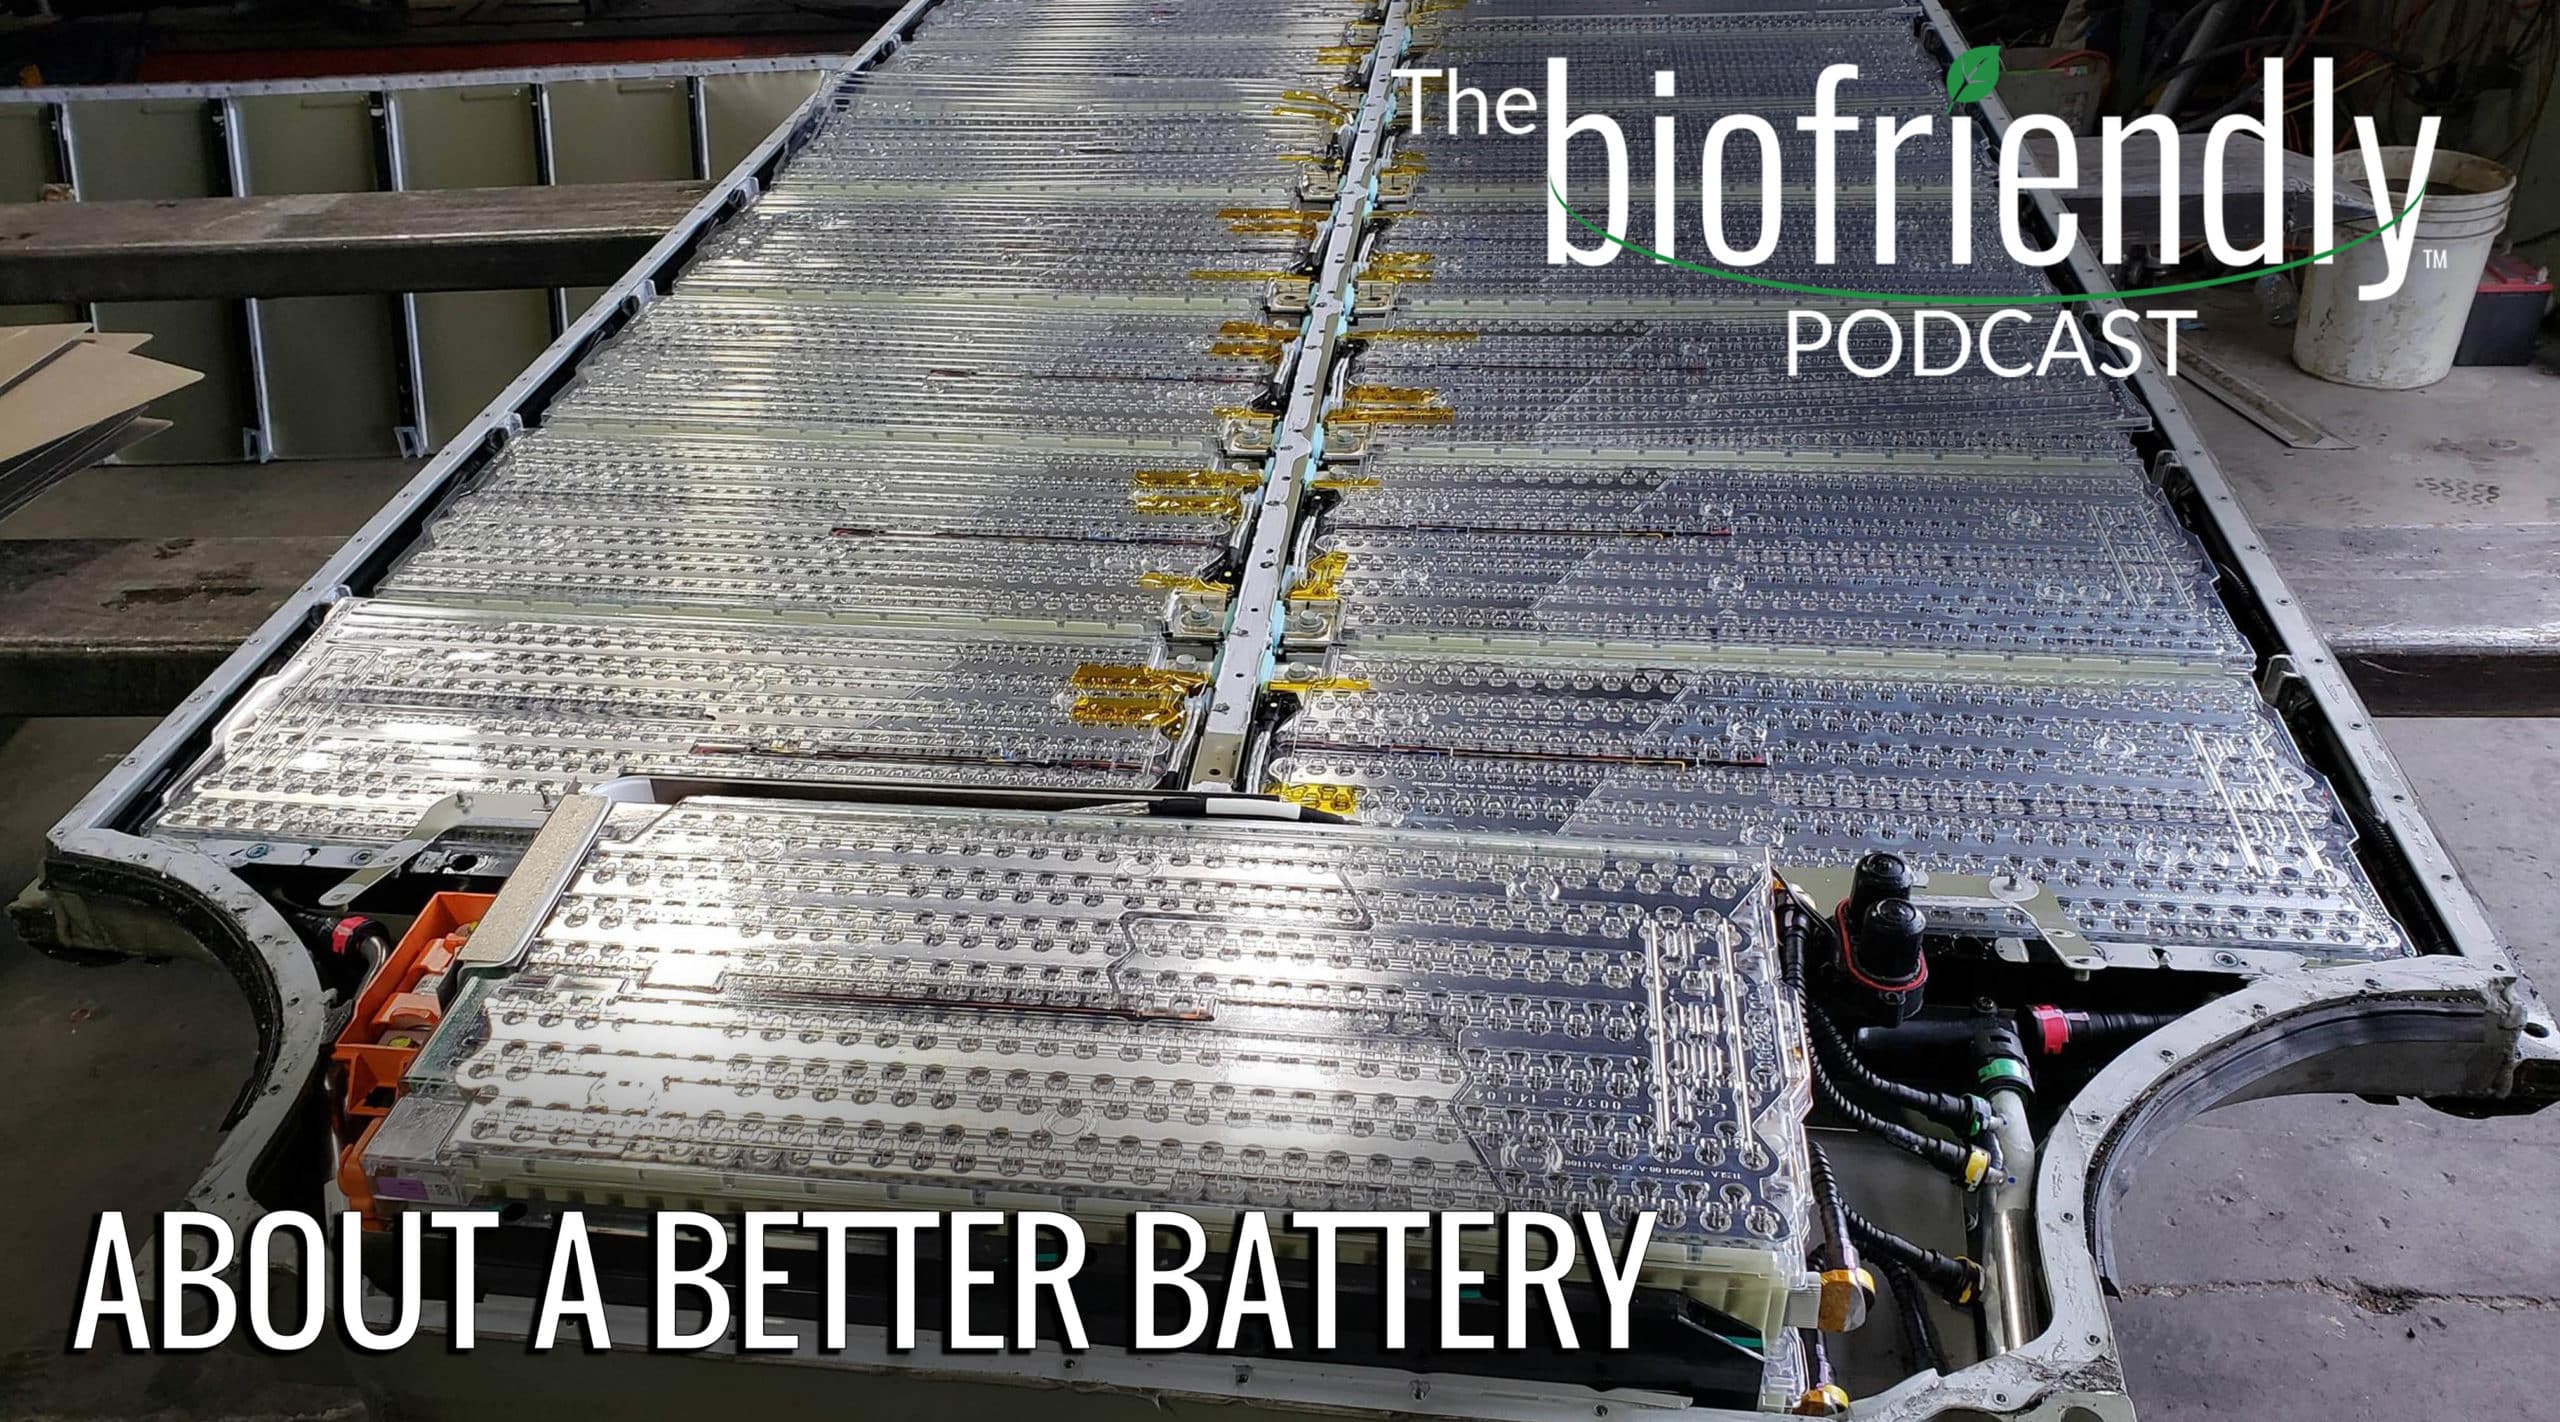 The Biofriendly Podcast - Episode 47 - About A Better Battery